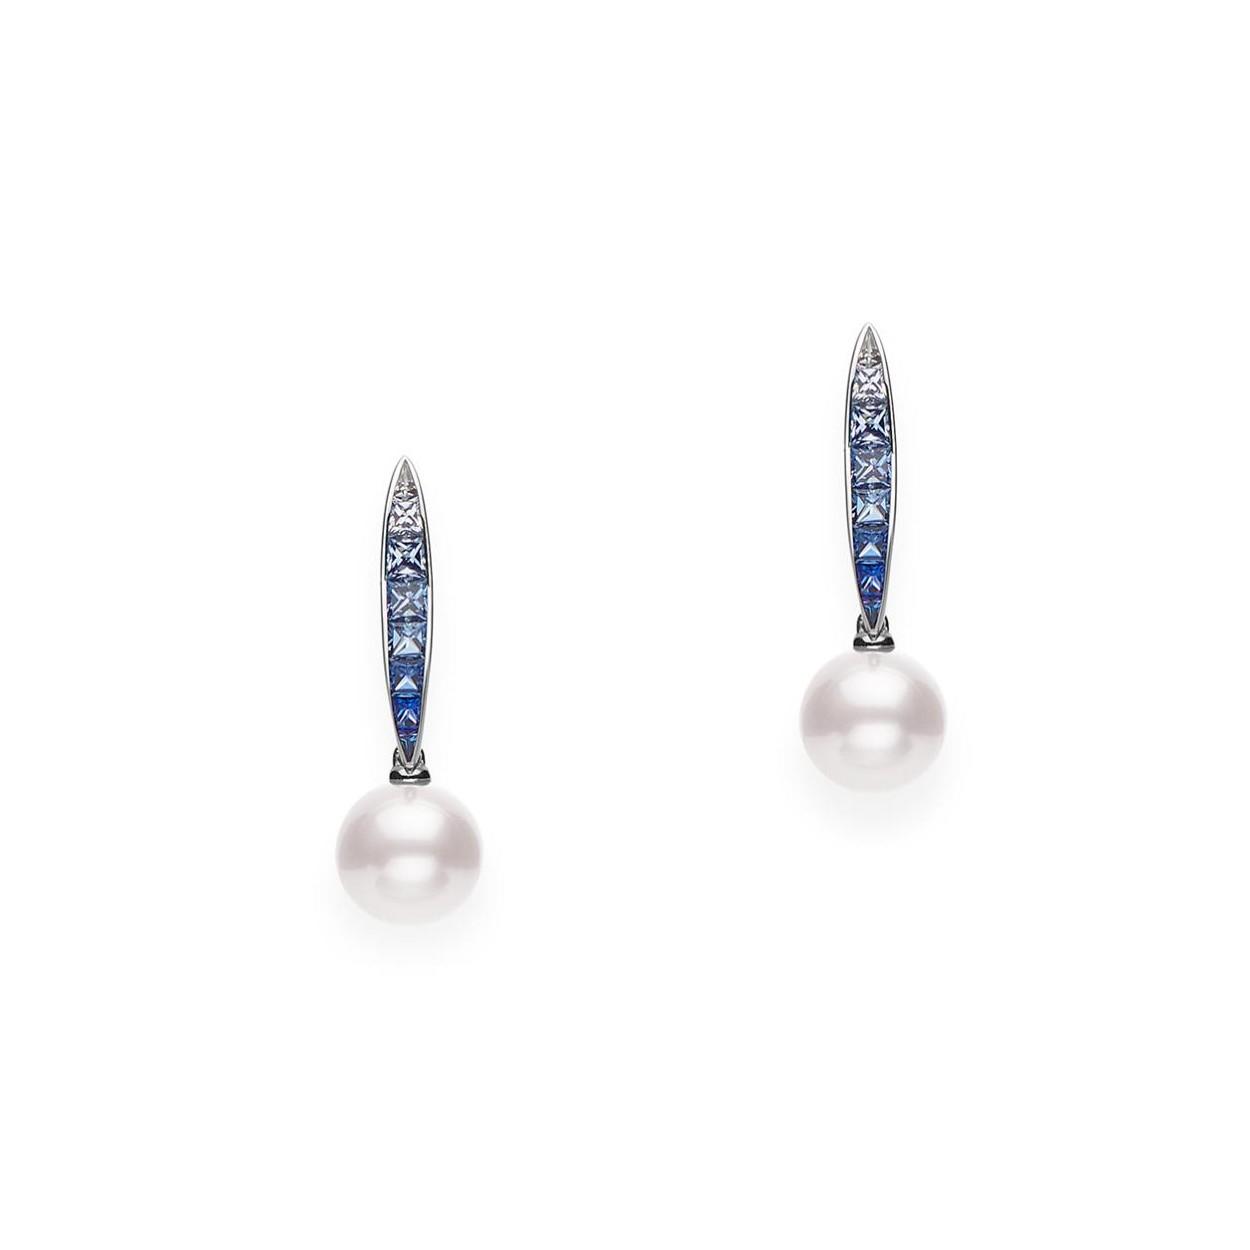 Mikimoto Ocean Collection Sapphire and Pearl Earrings